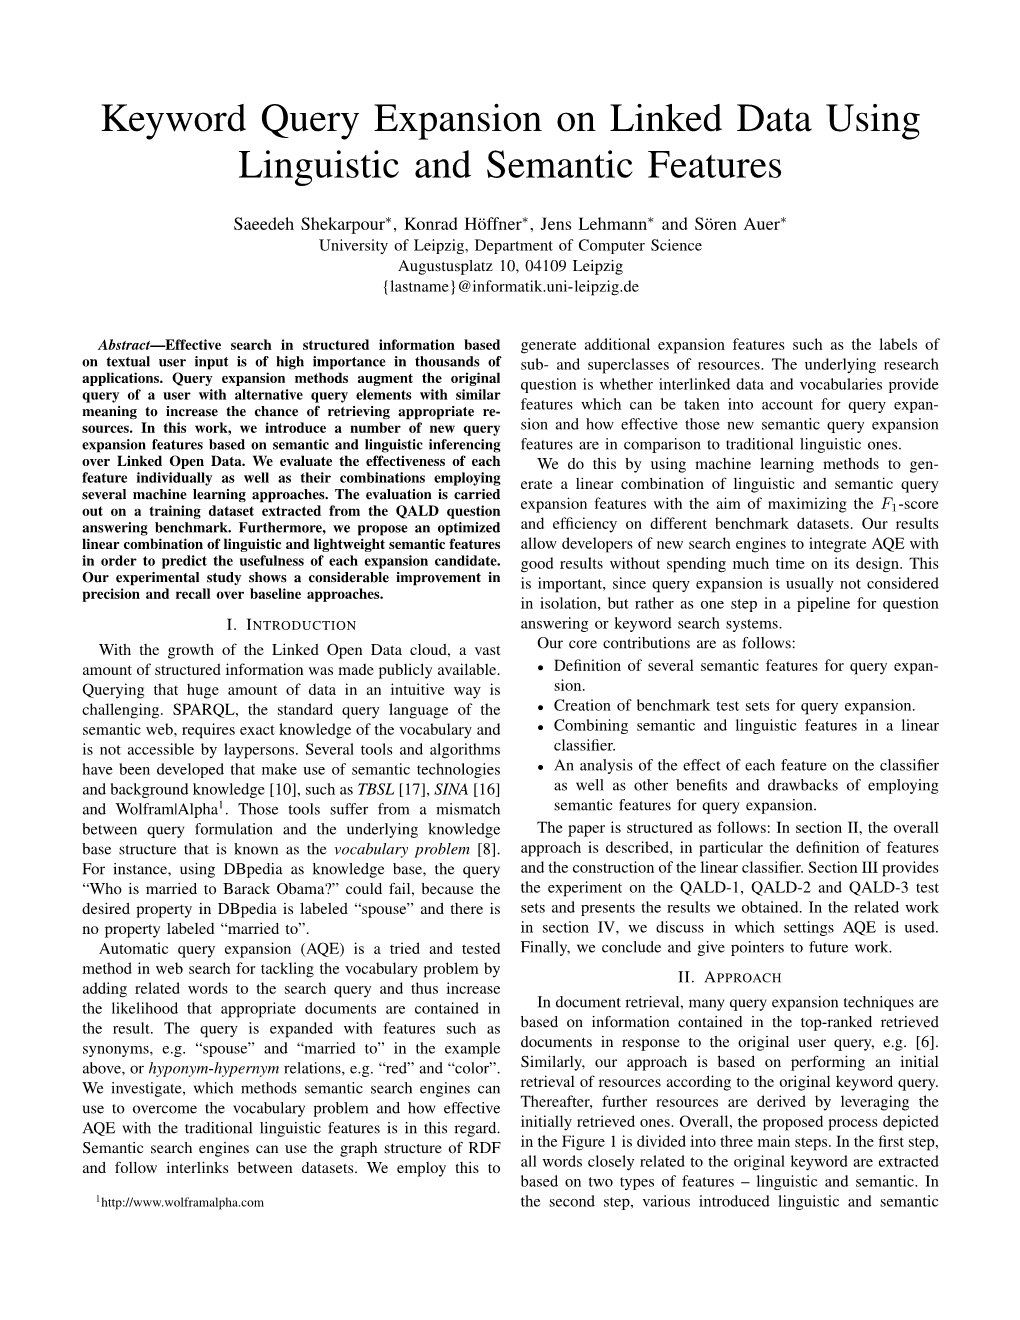 Keyword Query Expansion on Linked Data Using Linguistic and Semantic Features